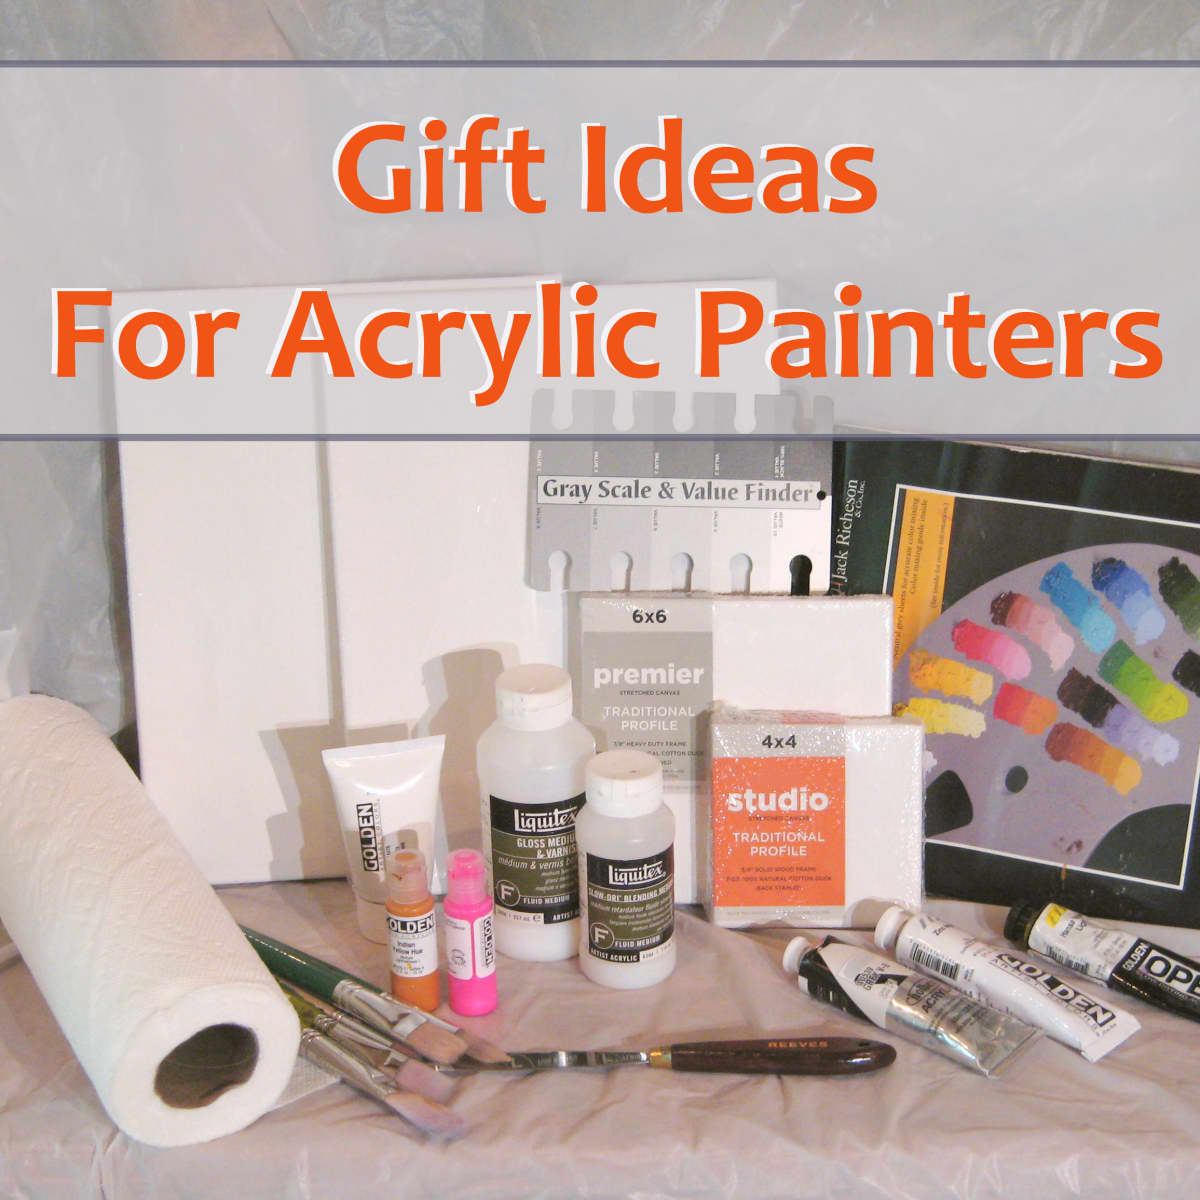 12 Perfect Gift Ideas for Artists Who Paint [That'll Get Their Creative  Juices Flowing]